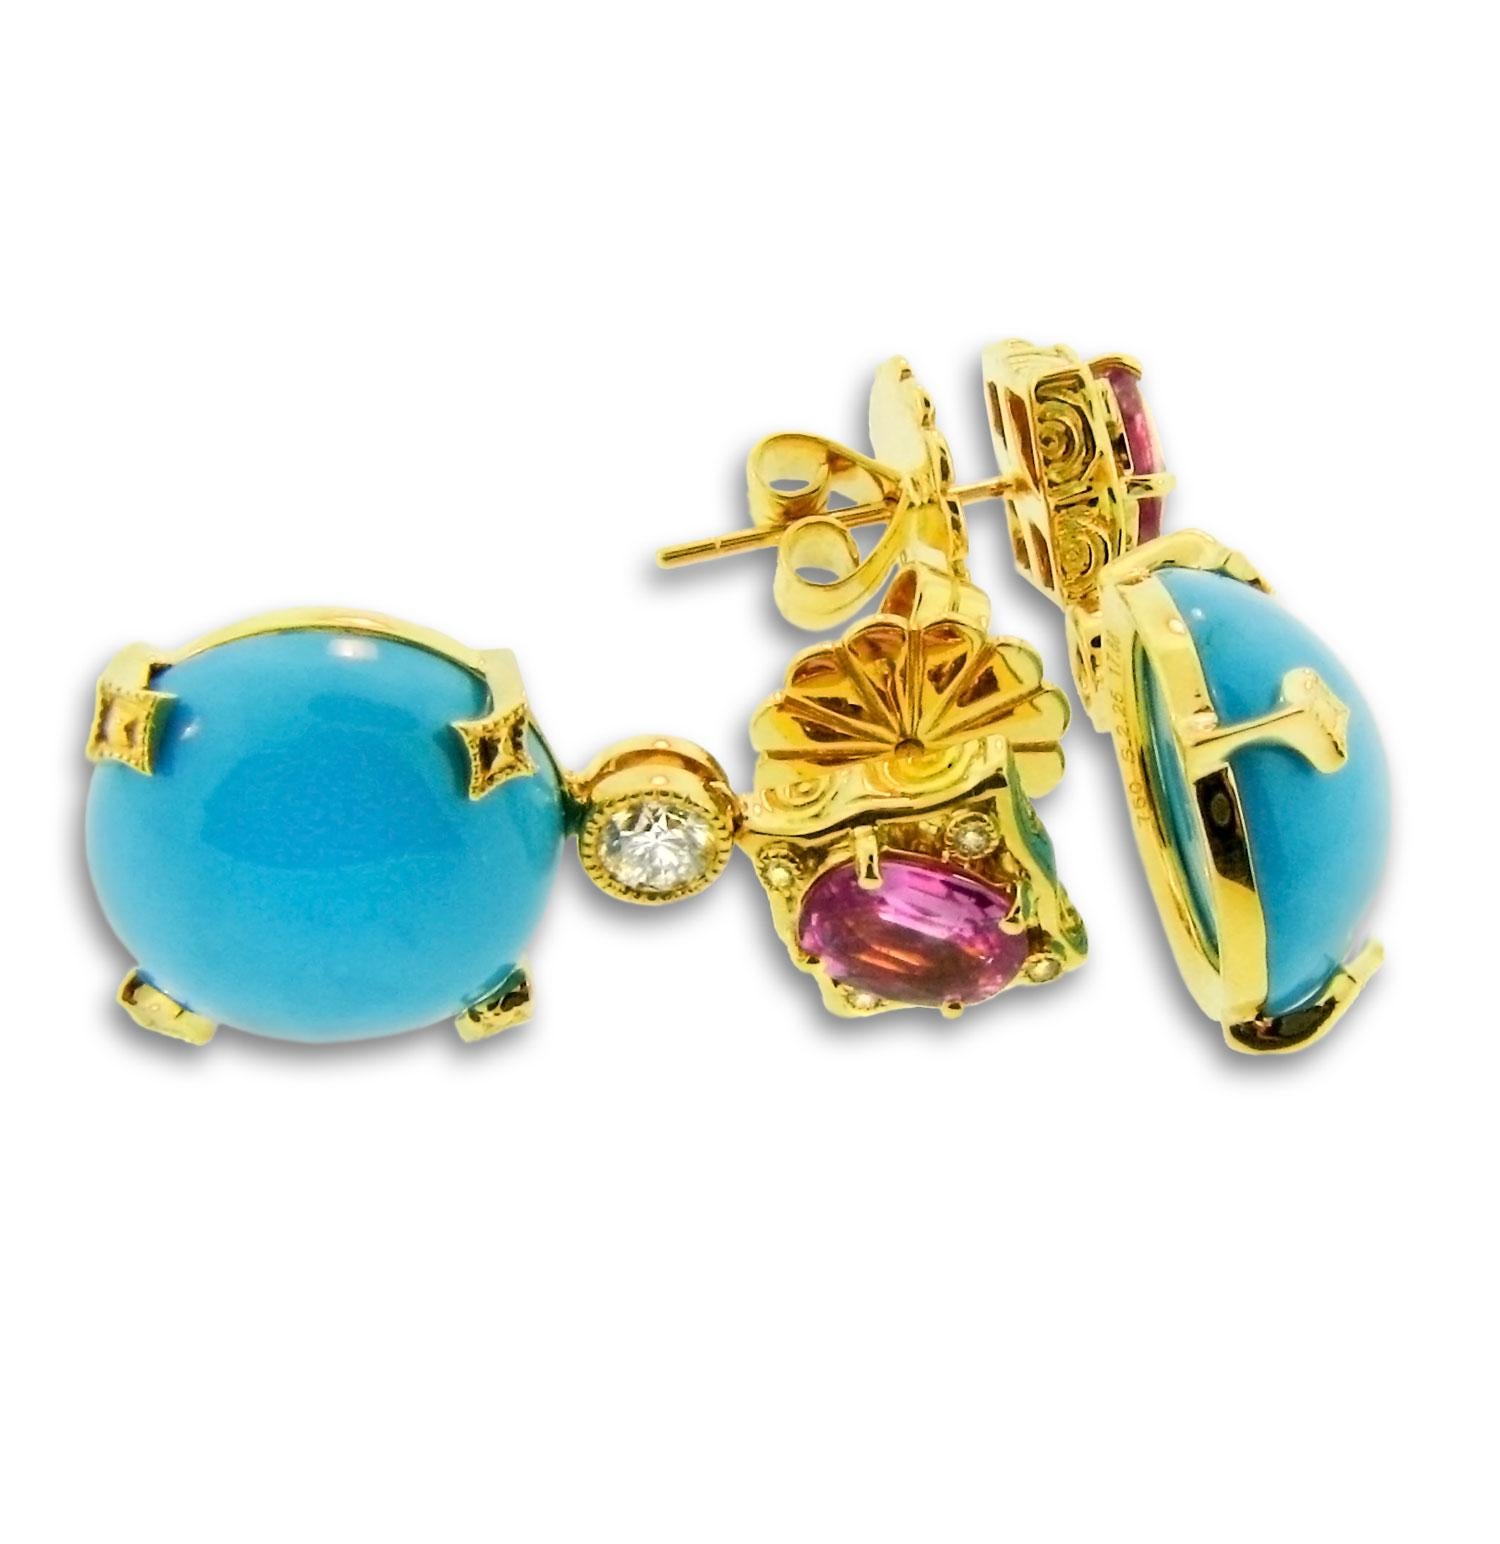 Contemporary 17.88 Carat Sleeping Beauty Turquoise and 2.25 Carat Pink Sapphire Earrings For Sale